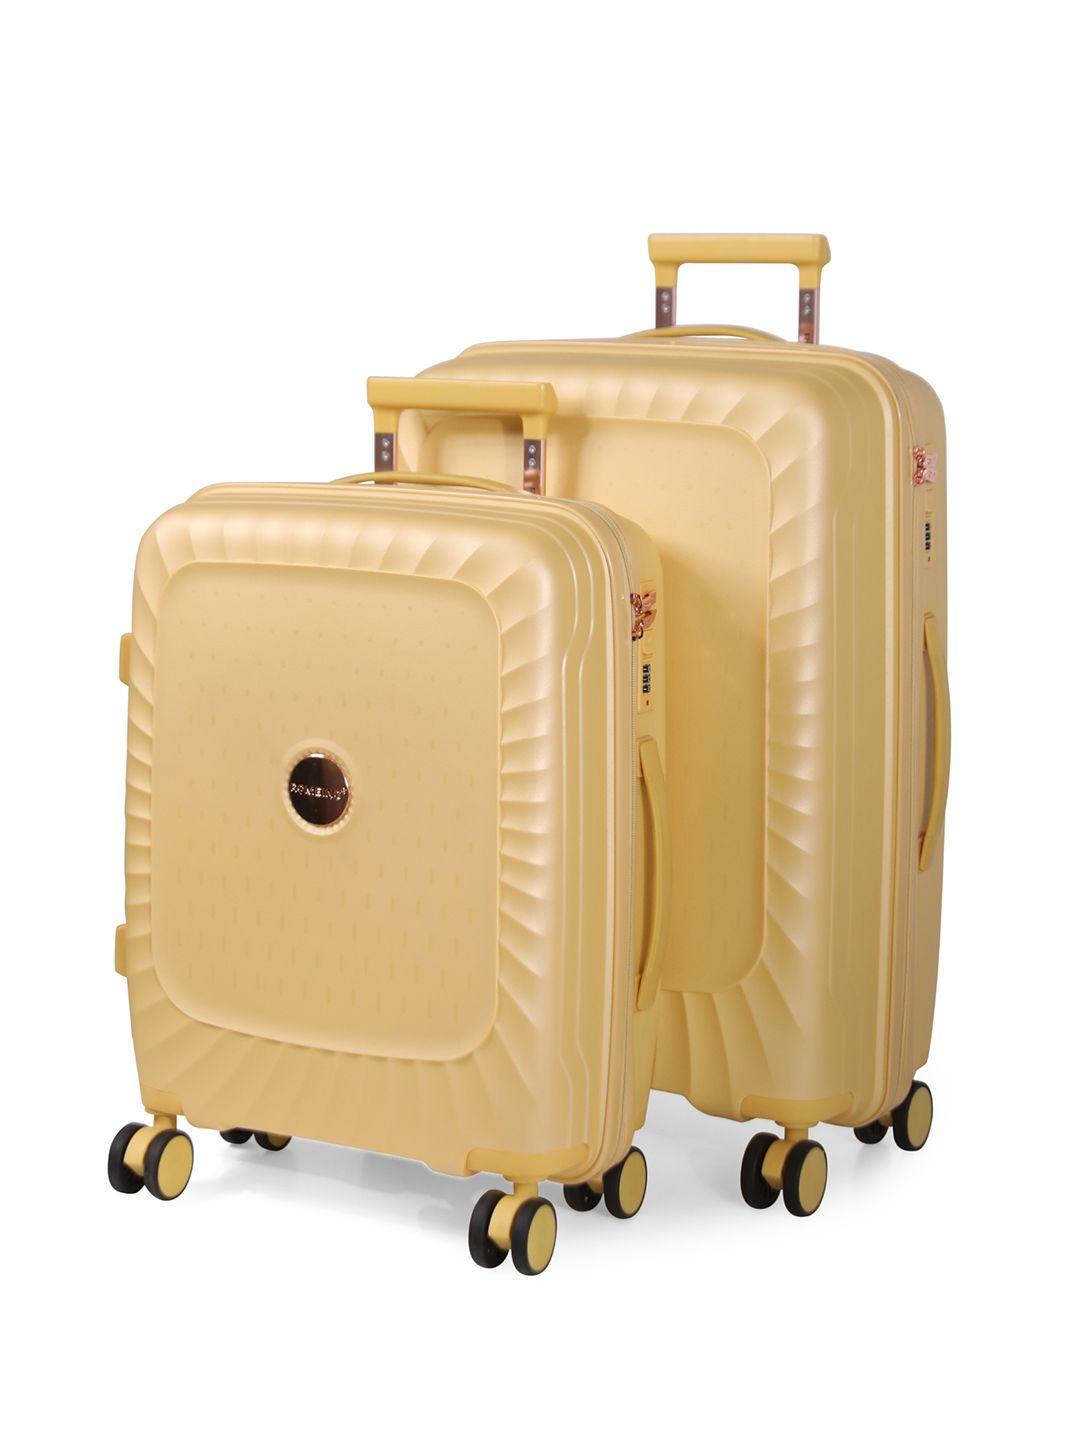 romeing sicily set of 2 sicily textured hard-sided trolley suitcase